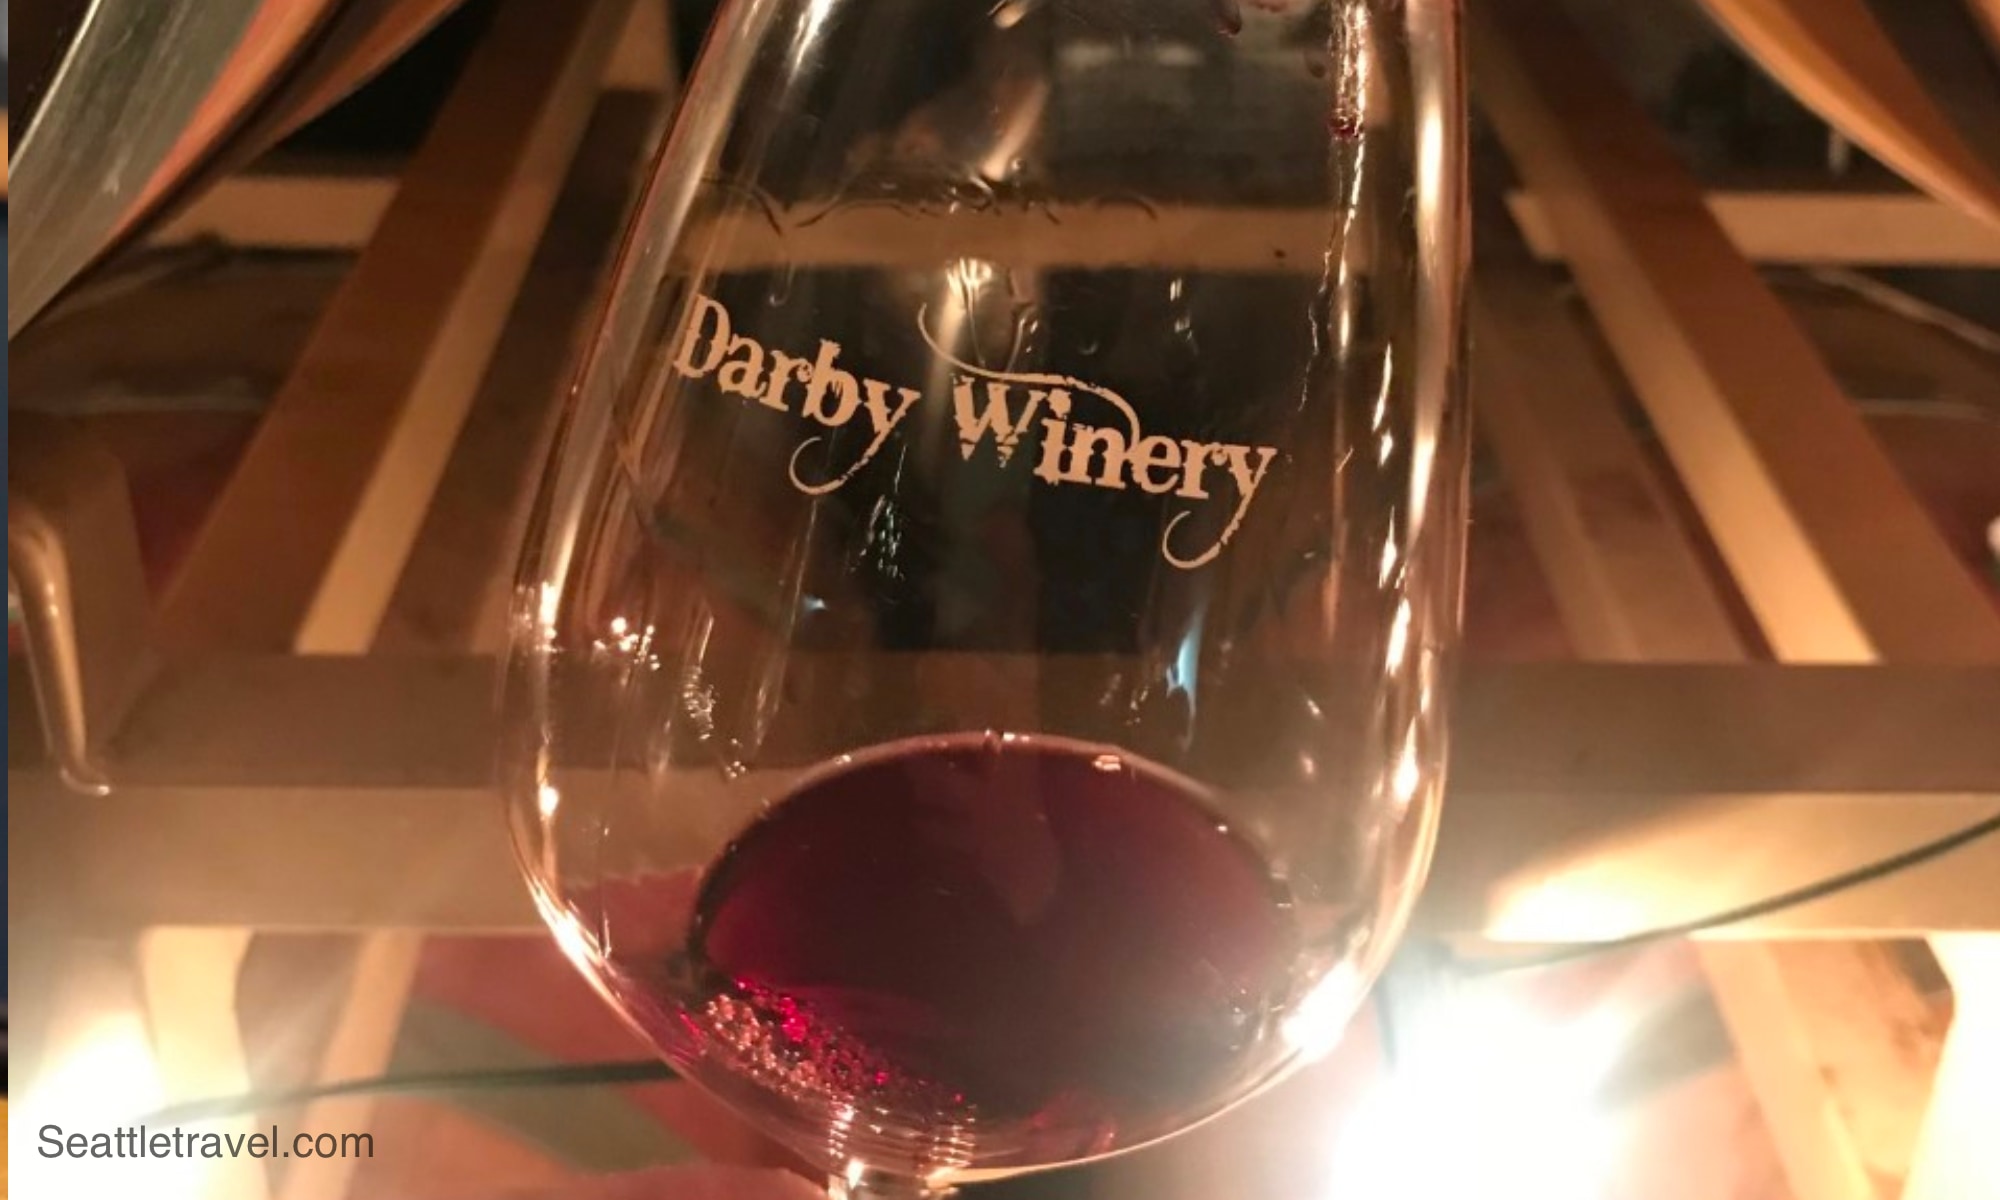 Darby Winery